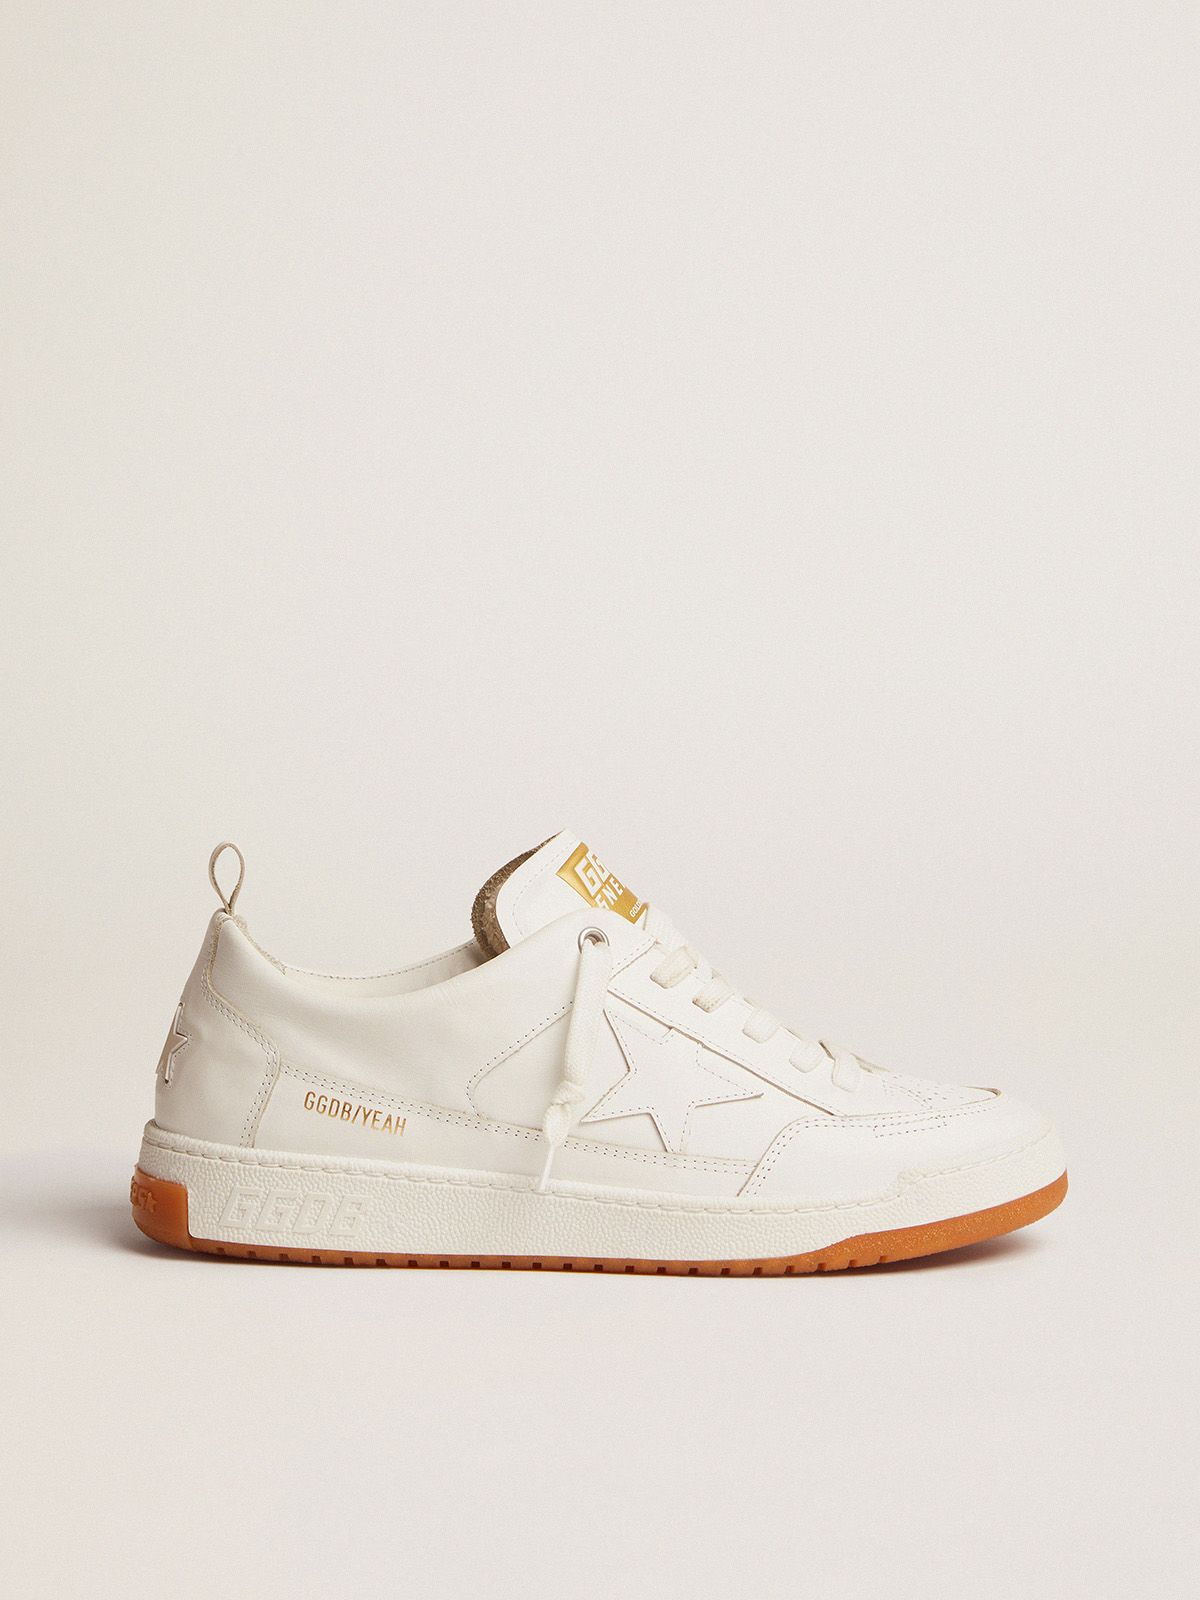 Yeah sneakers in optical white leather